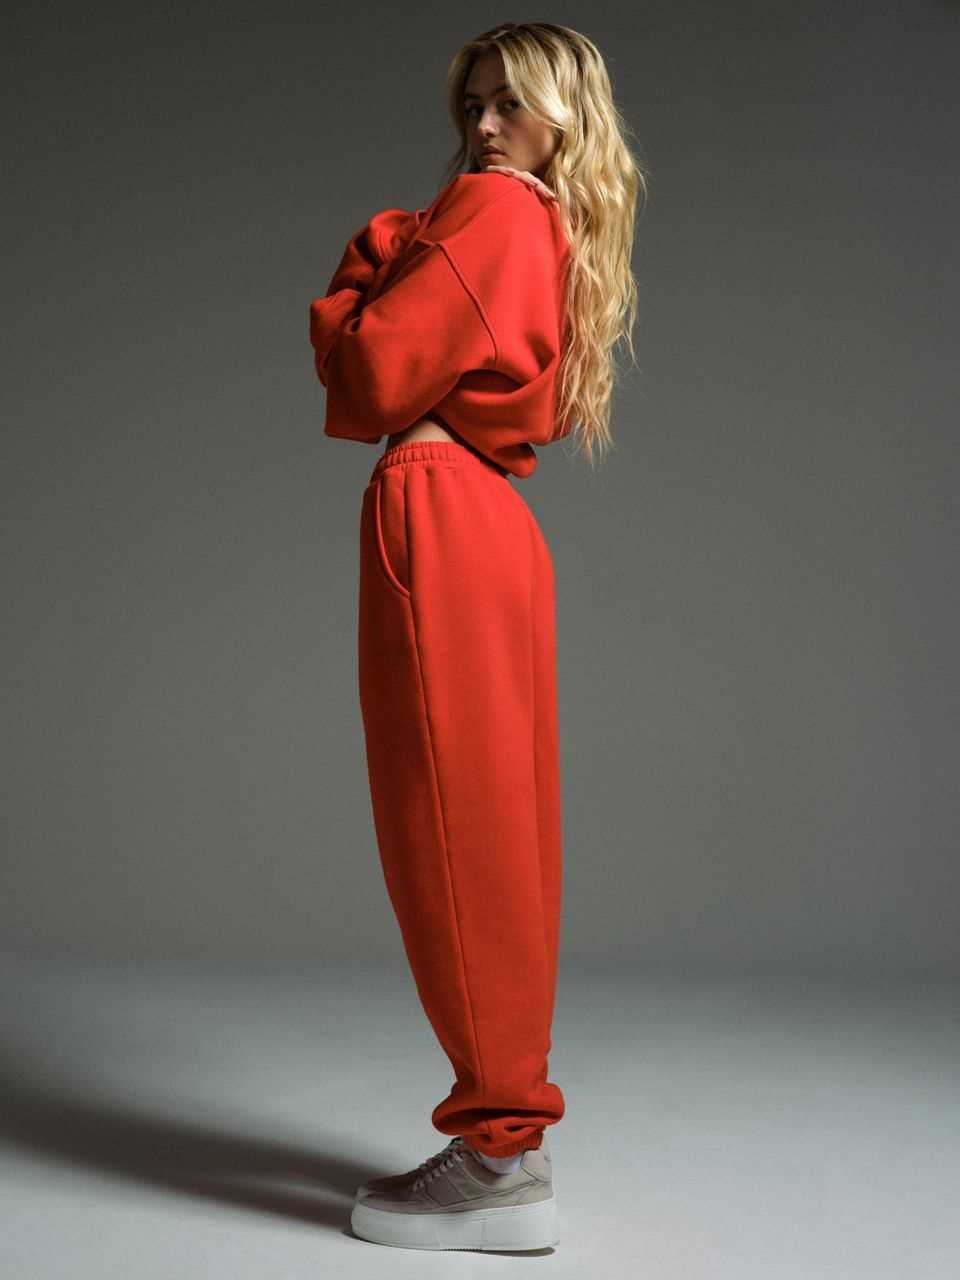 Leni Klum poses for a photo in a red jogging suit.